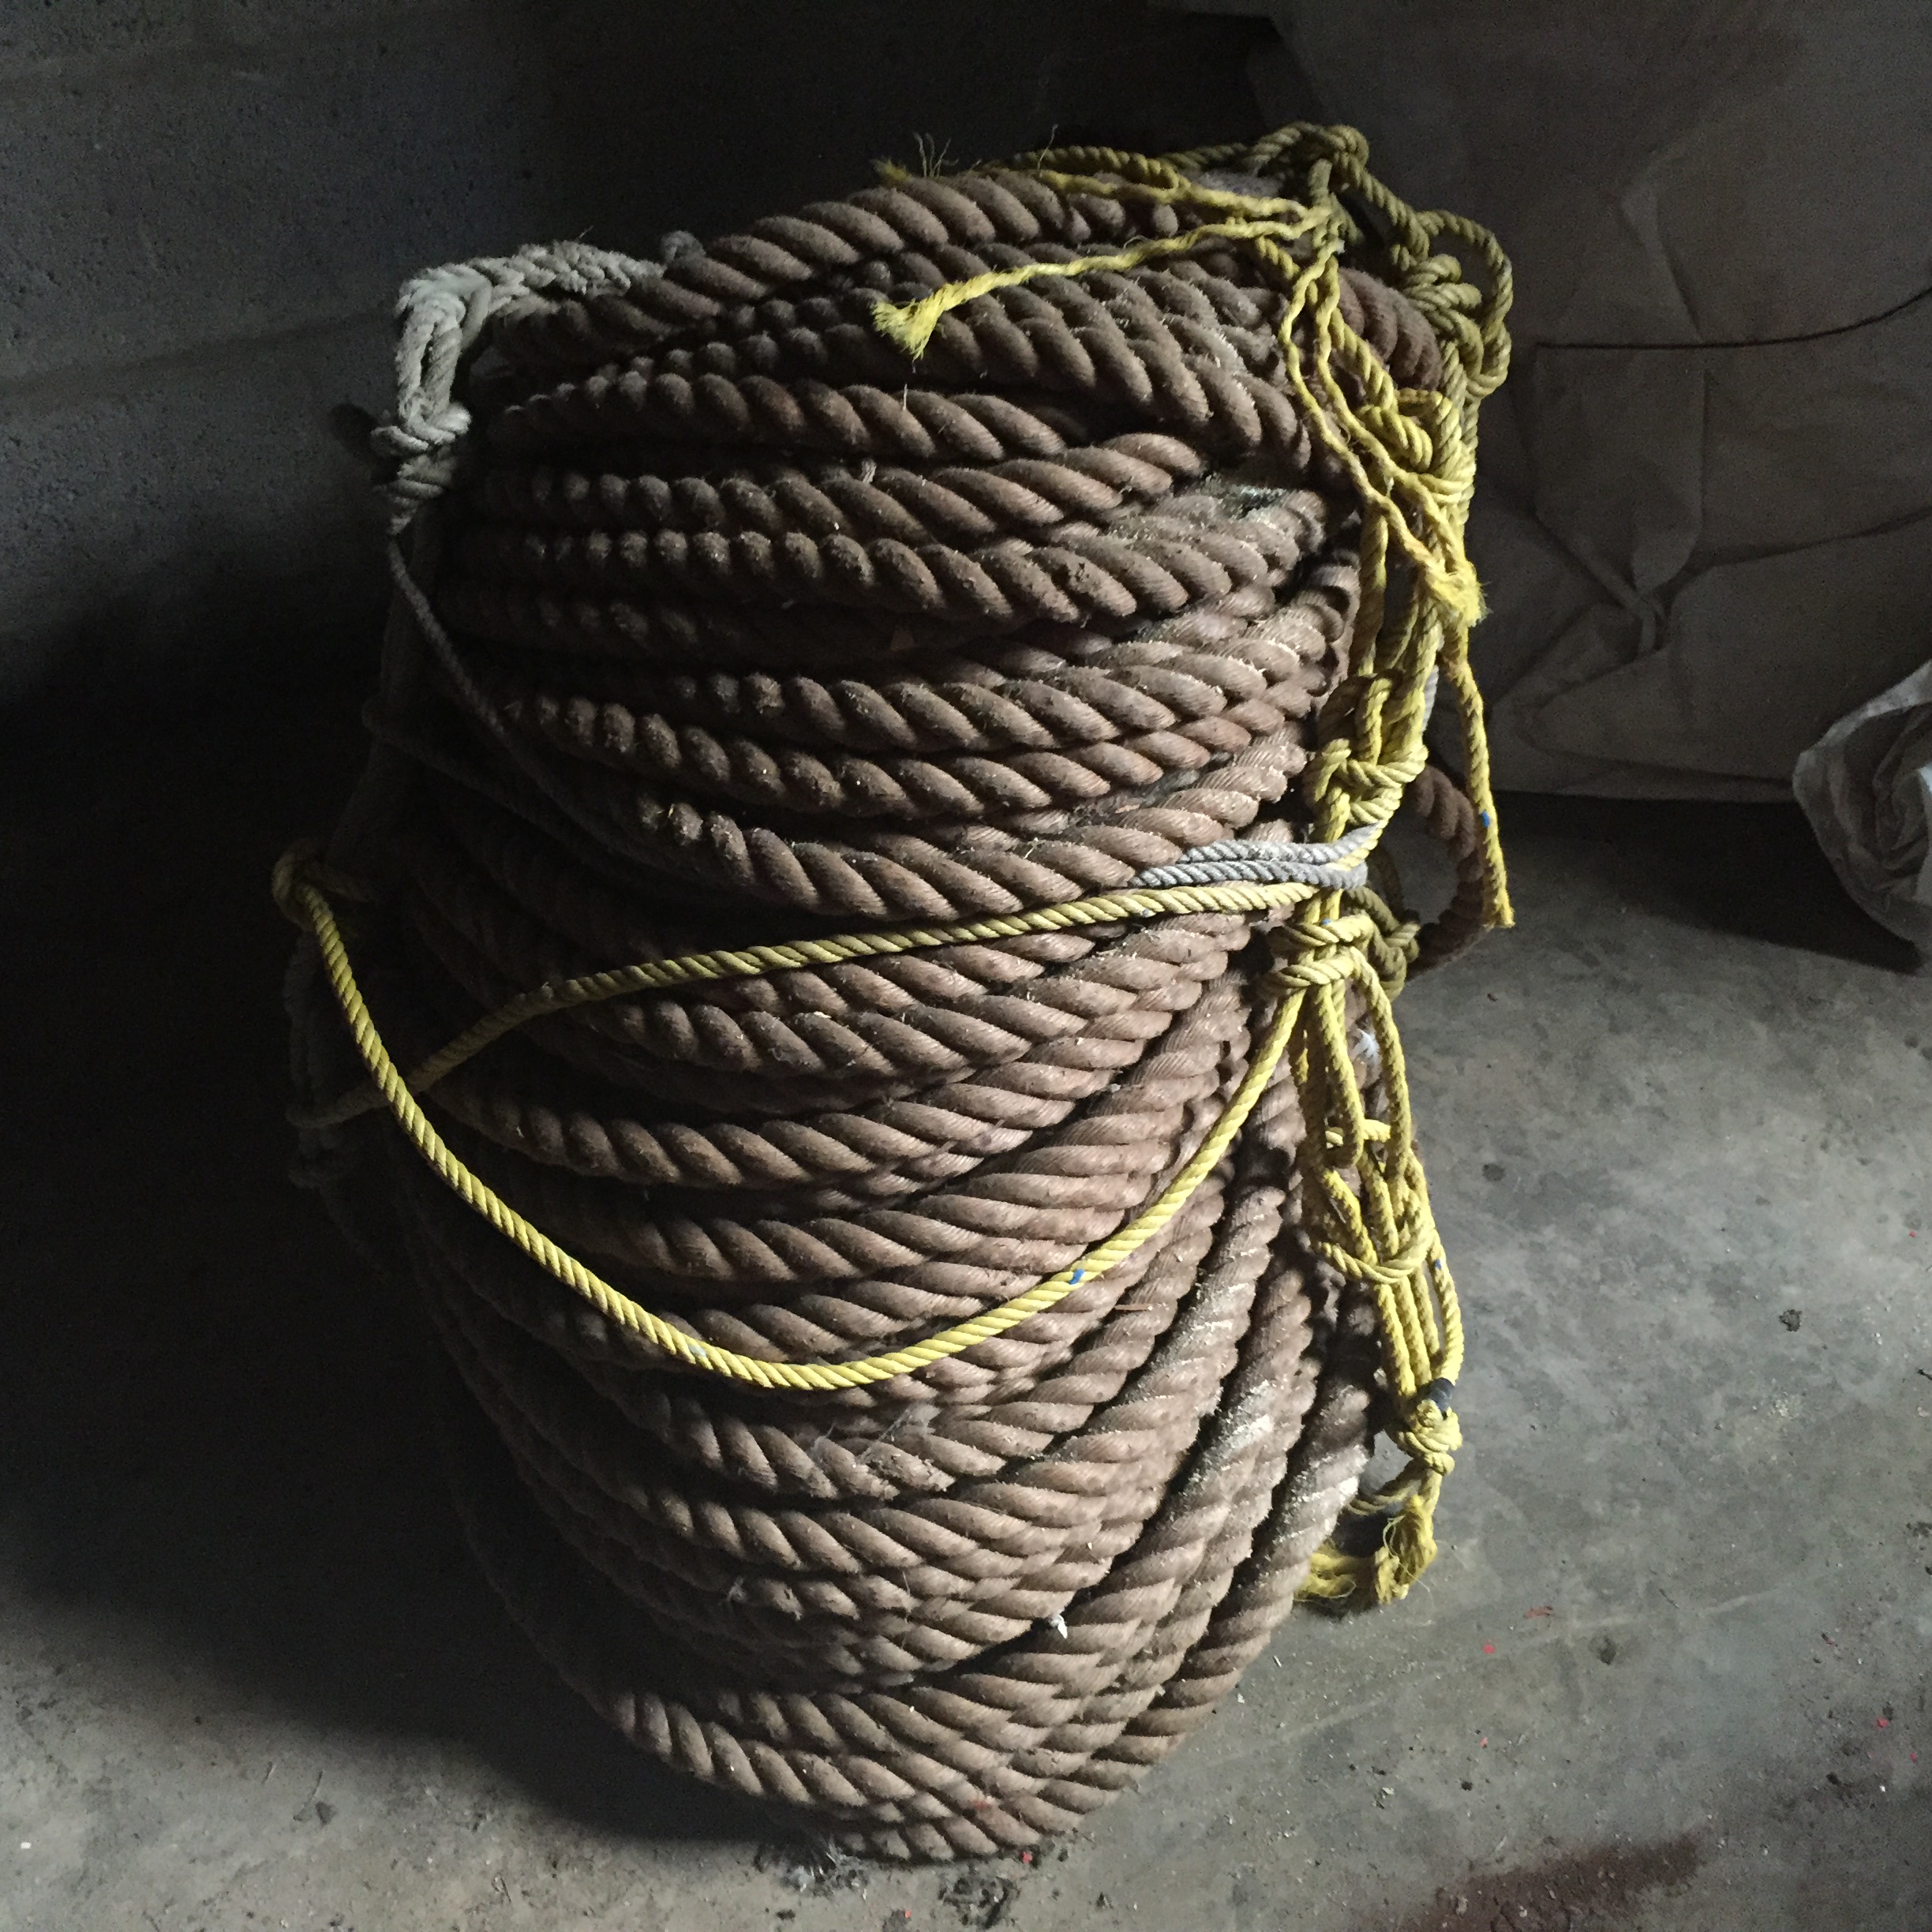 A coil of rope. - Image 2 of 2